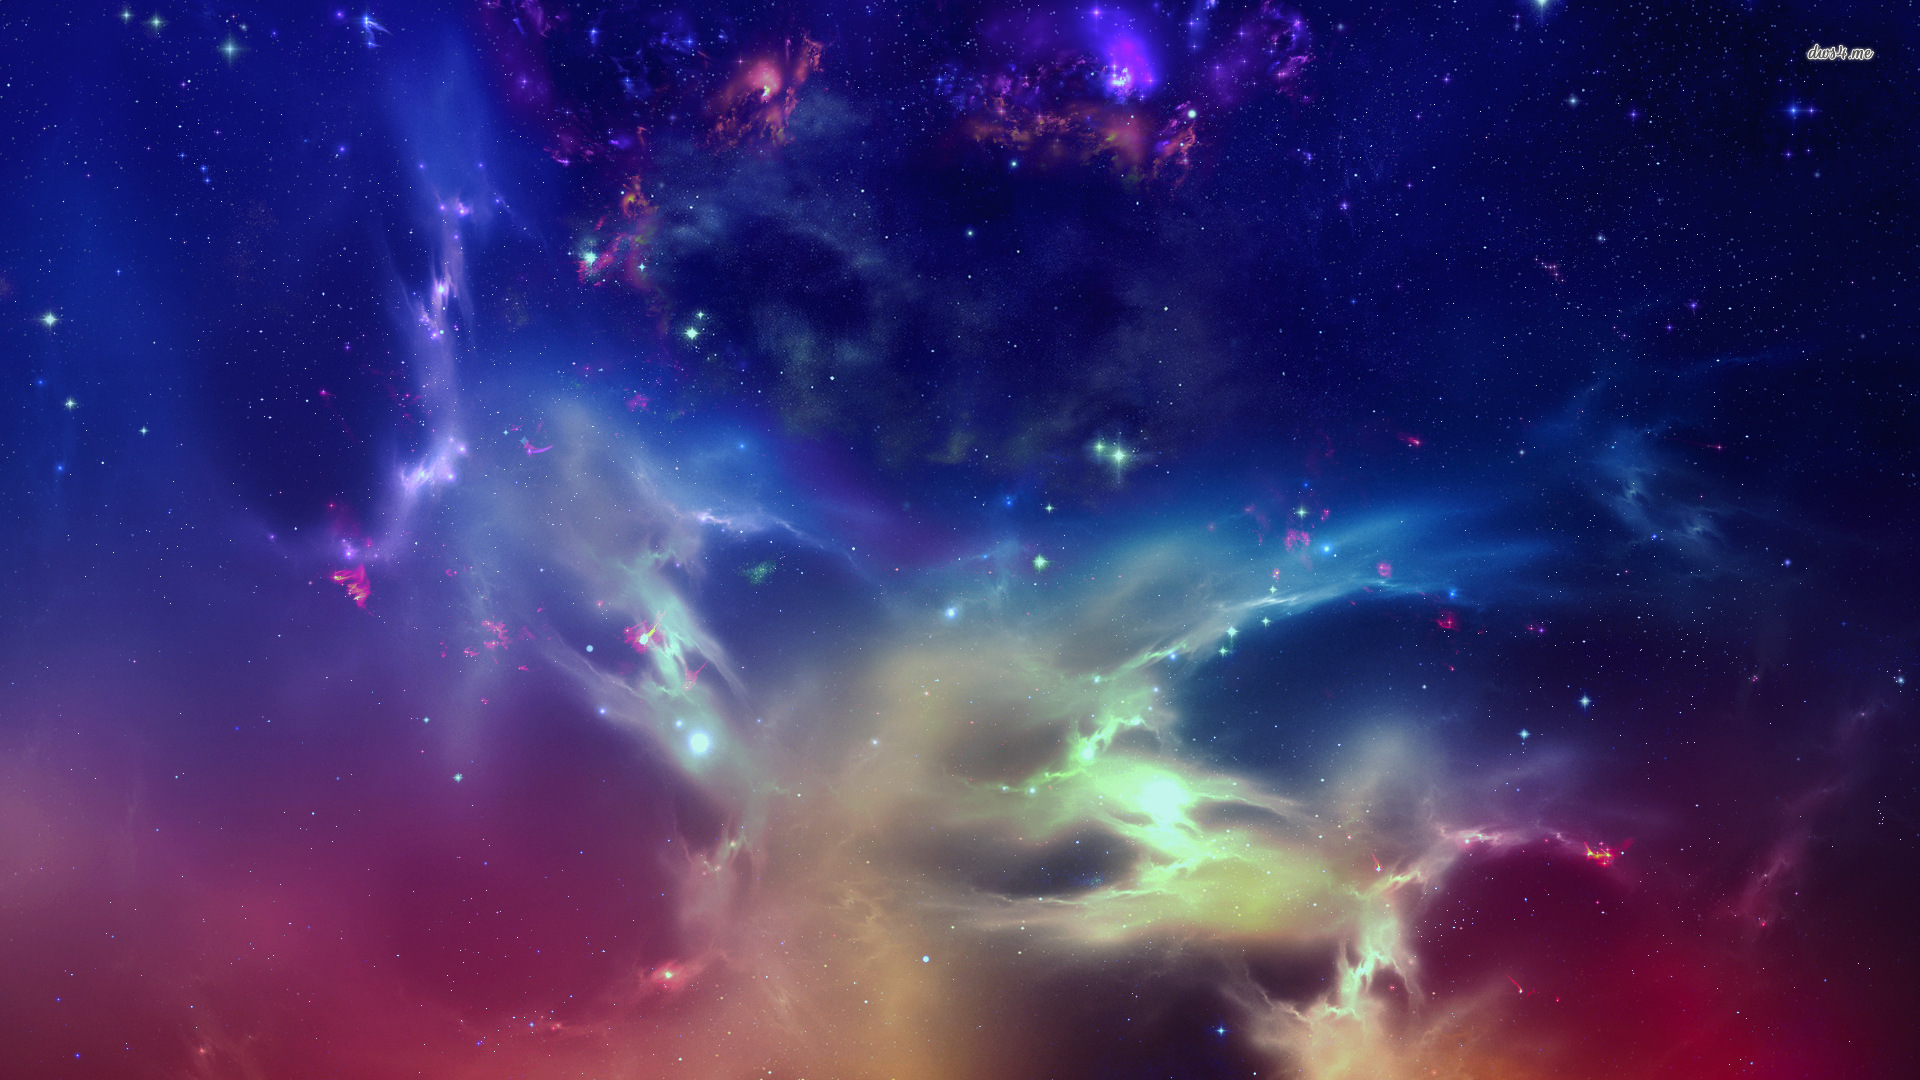 android n wallpaper 1080p,sky,nebula,atmosphere,outer space,astronomical object